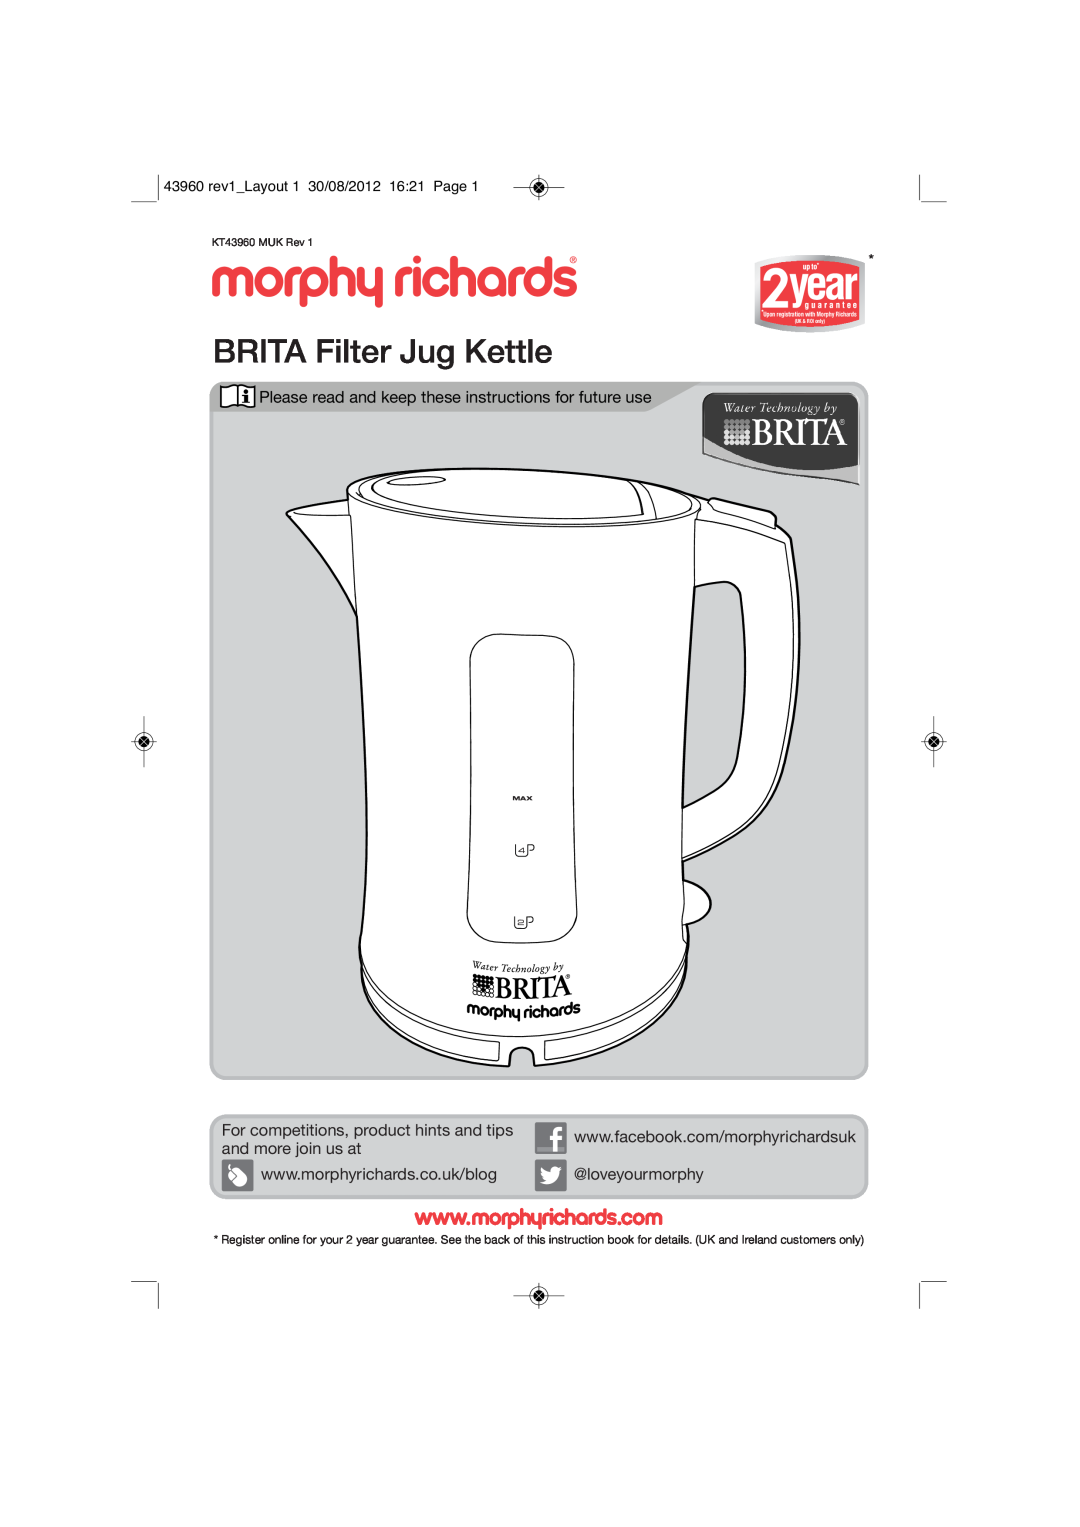 Morphy Richards KT43960 MUK manual BRITA Filter Jug Kettle, For competitions, product hints and tips, and more join us at 